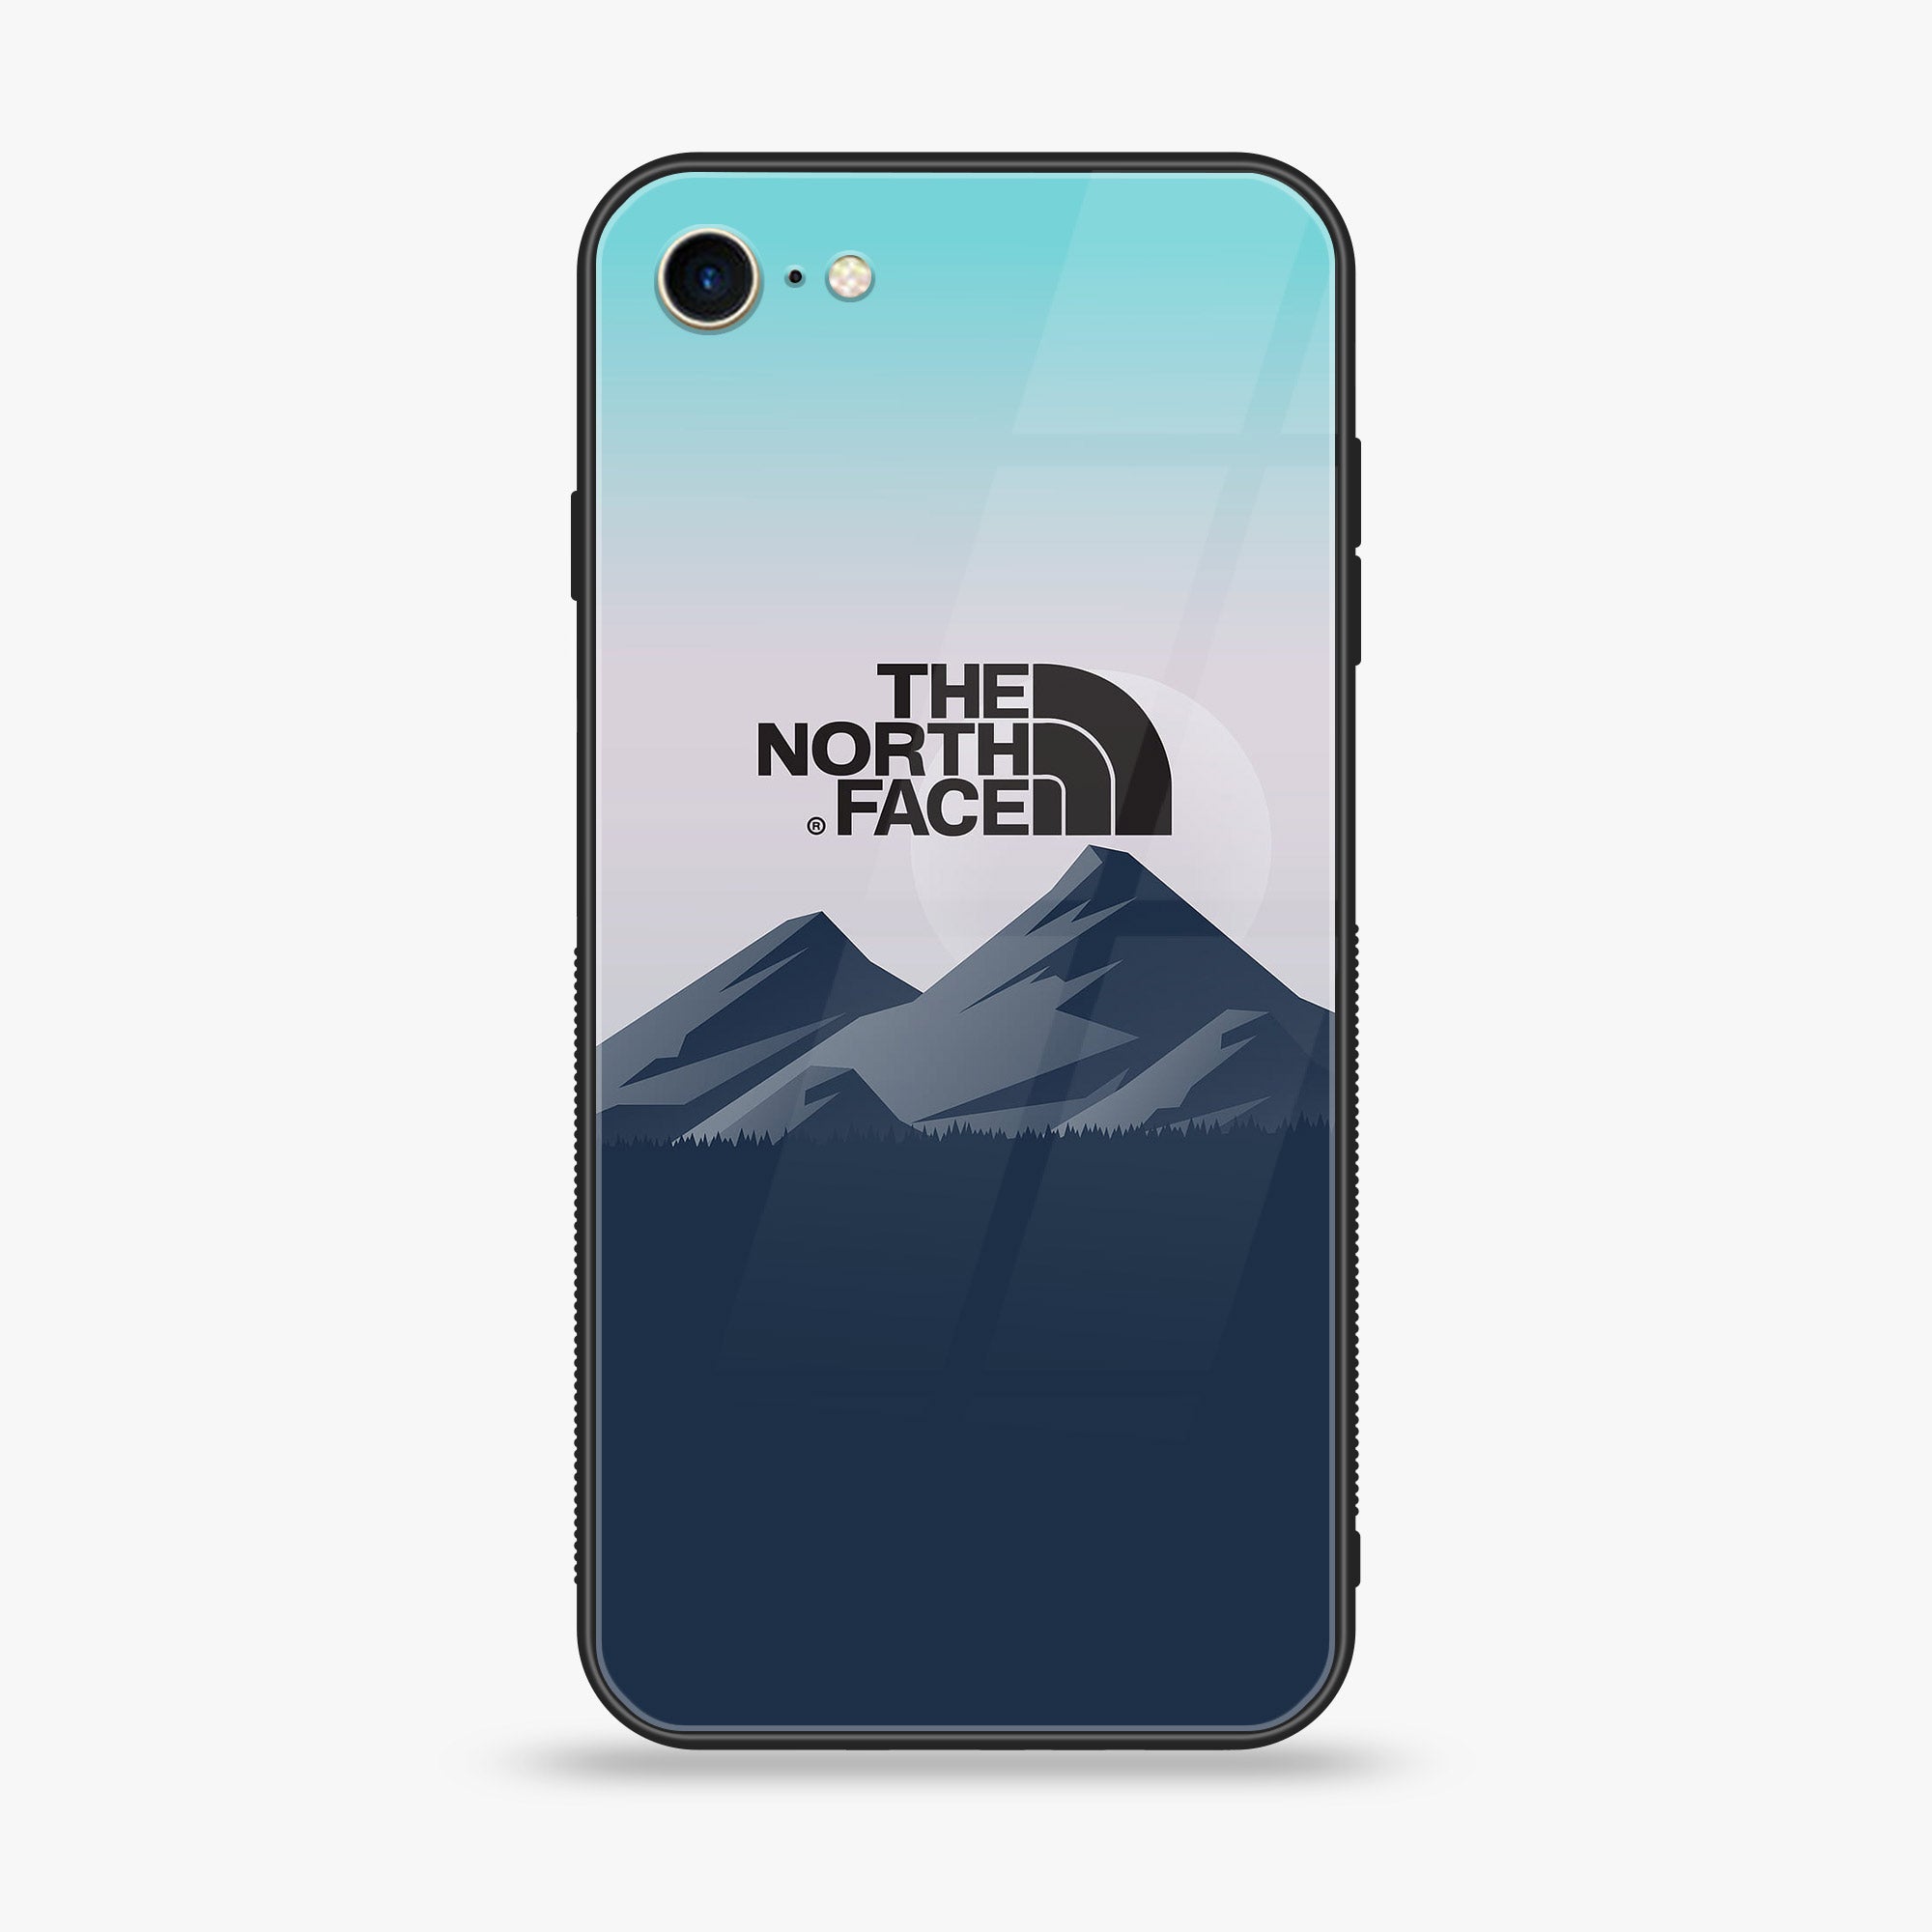 iPhone 7 - The North Face Series - Premium Printed Glass soft Bumper shock Proof Case